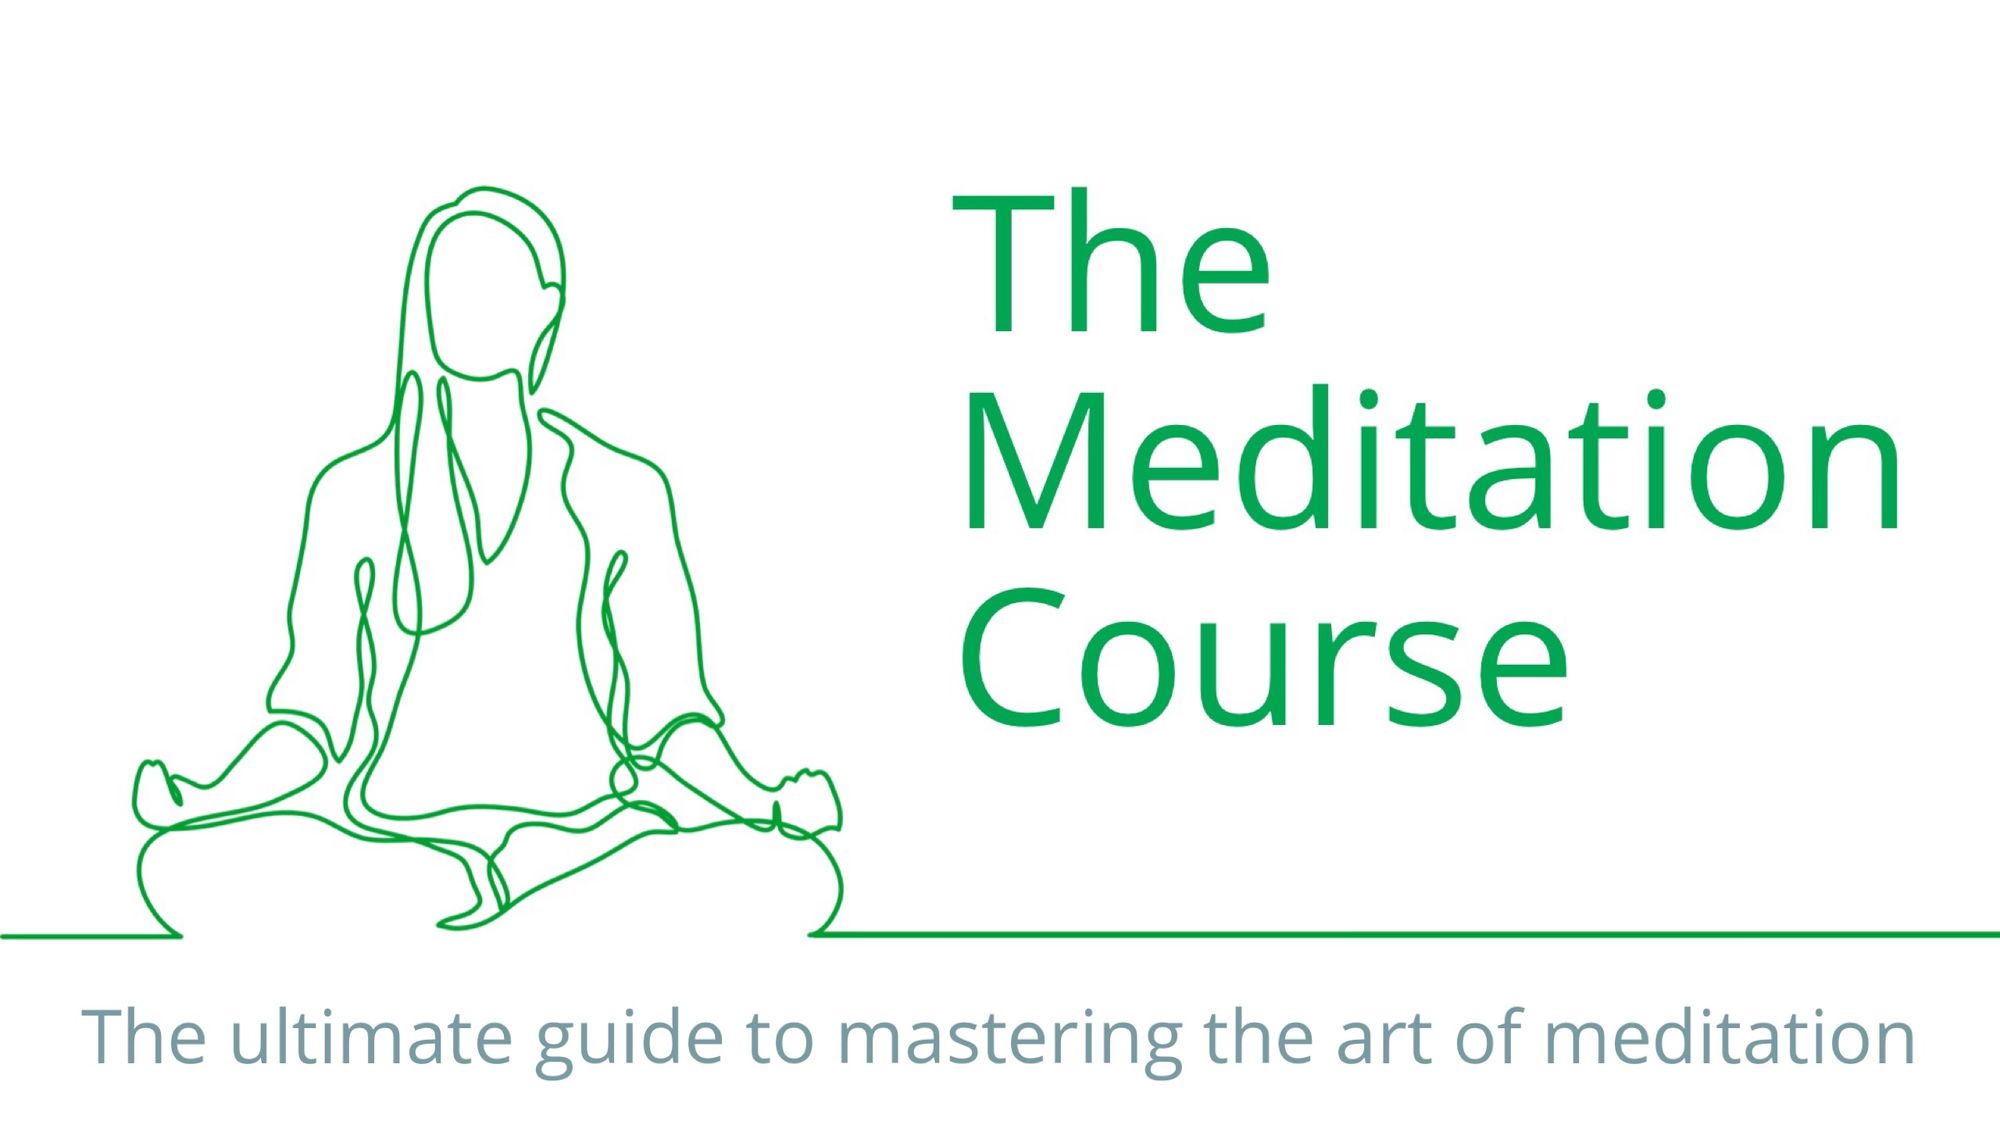 About The Meditation Course